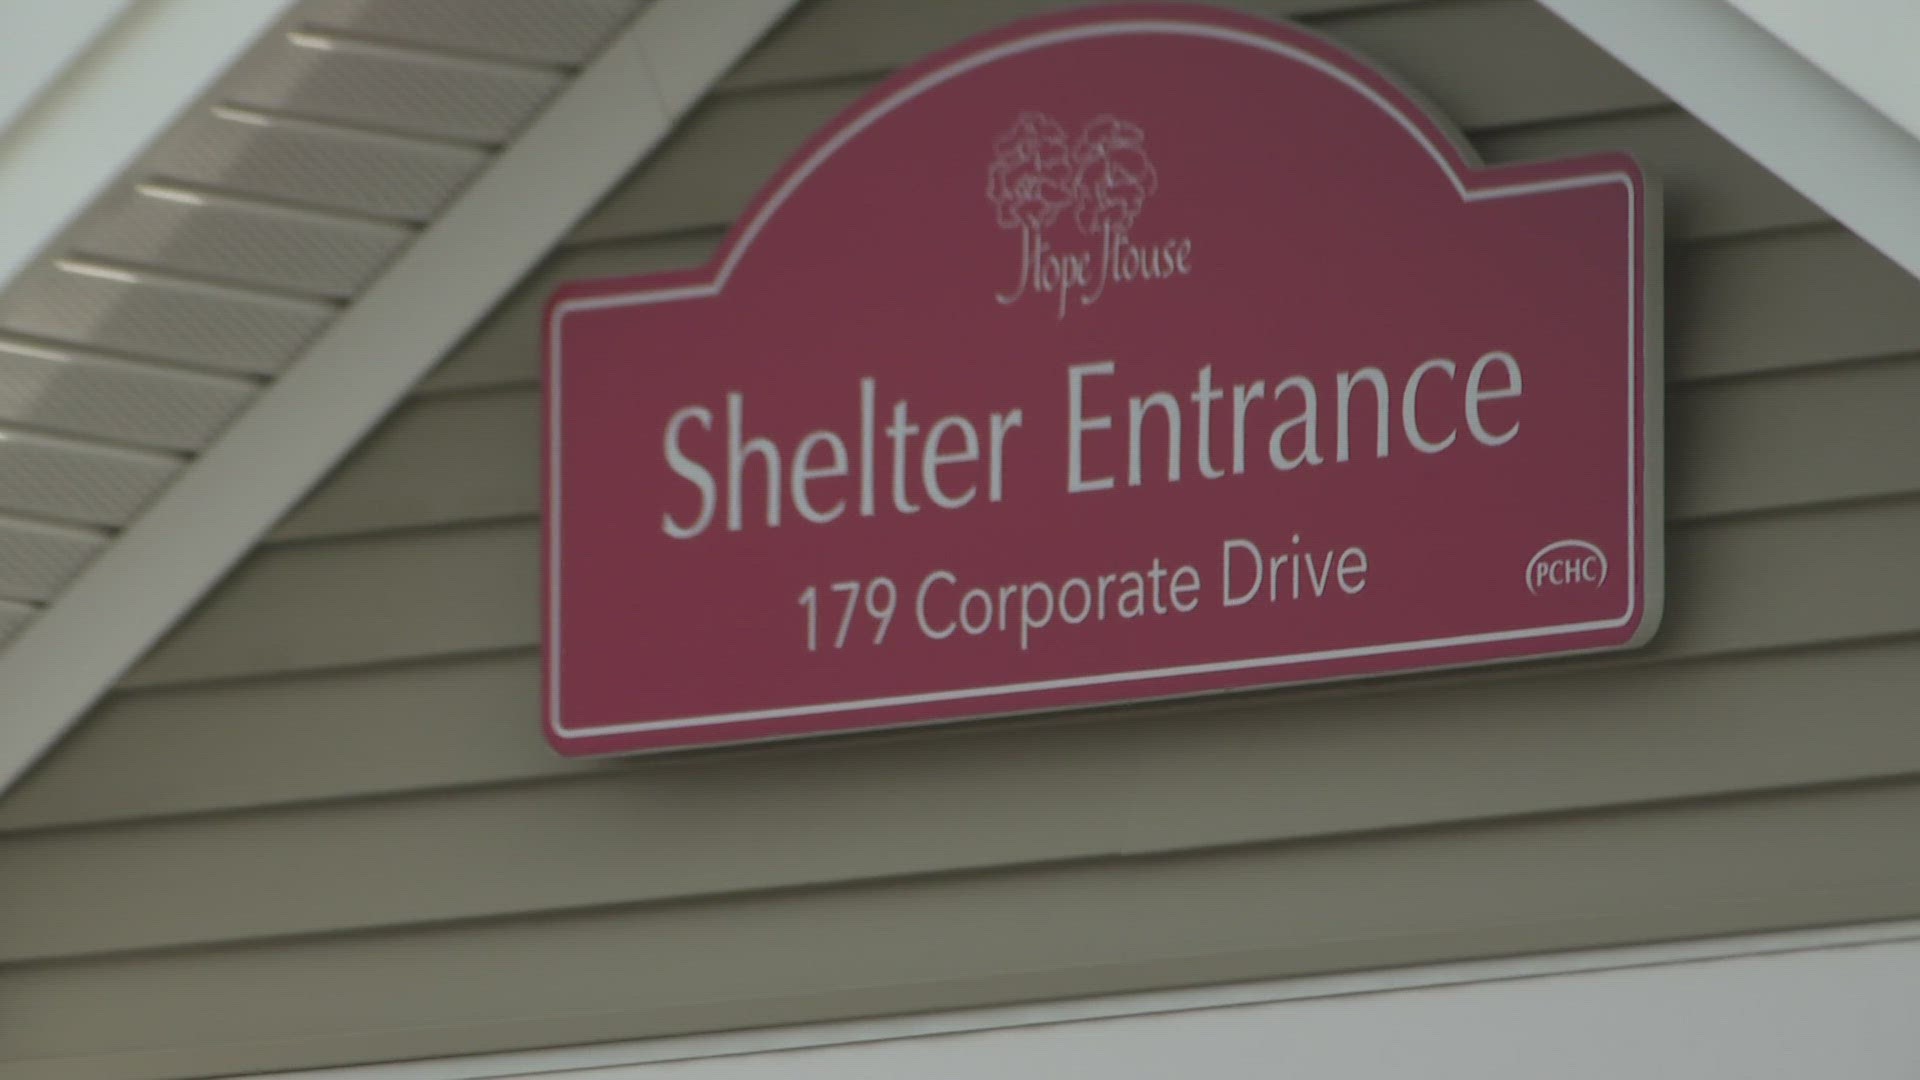 Penobscot Community Health Care is looking for a new partner to take over operations at the overnight shelter with capacity to house more than 50 people.